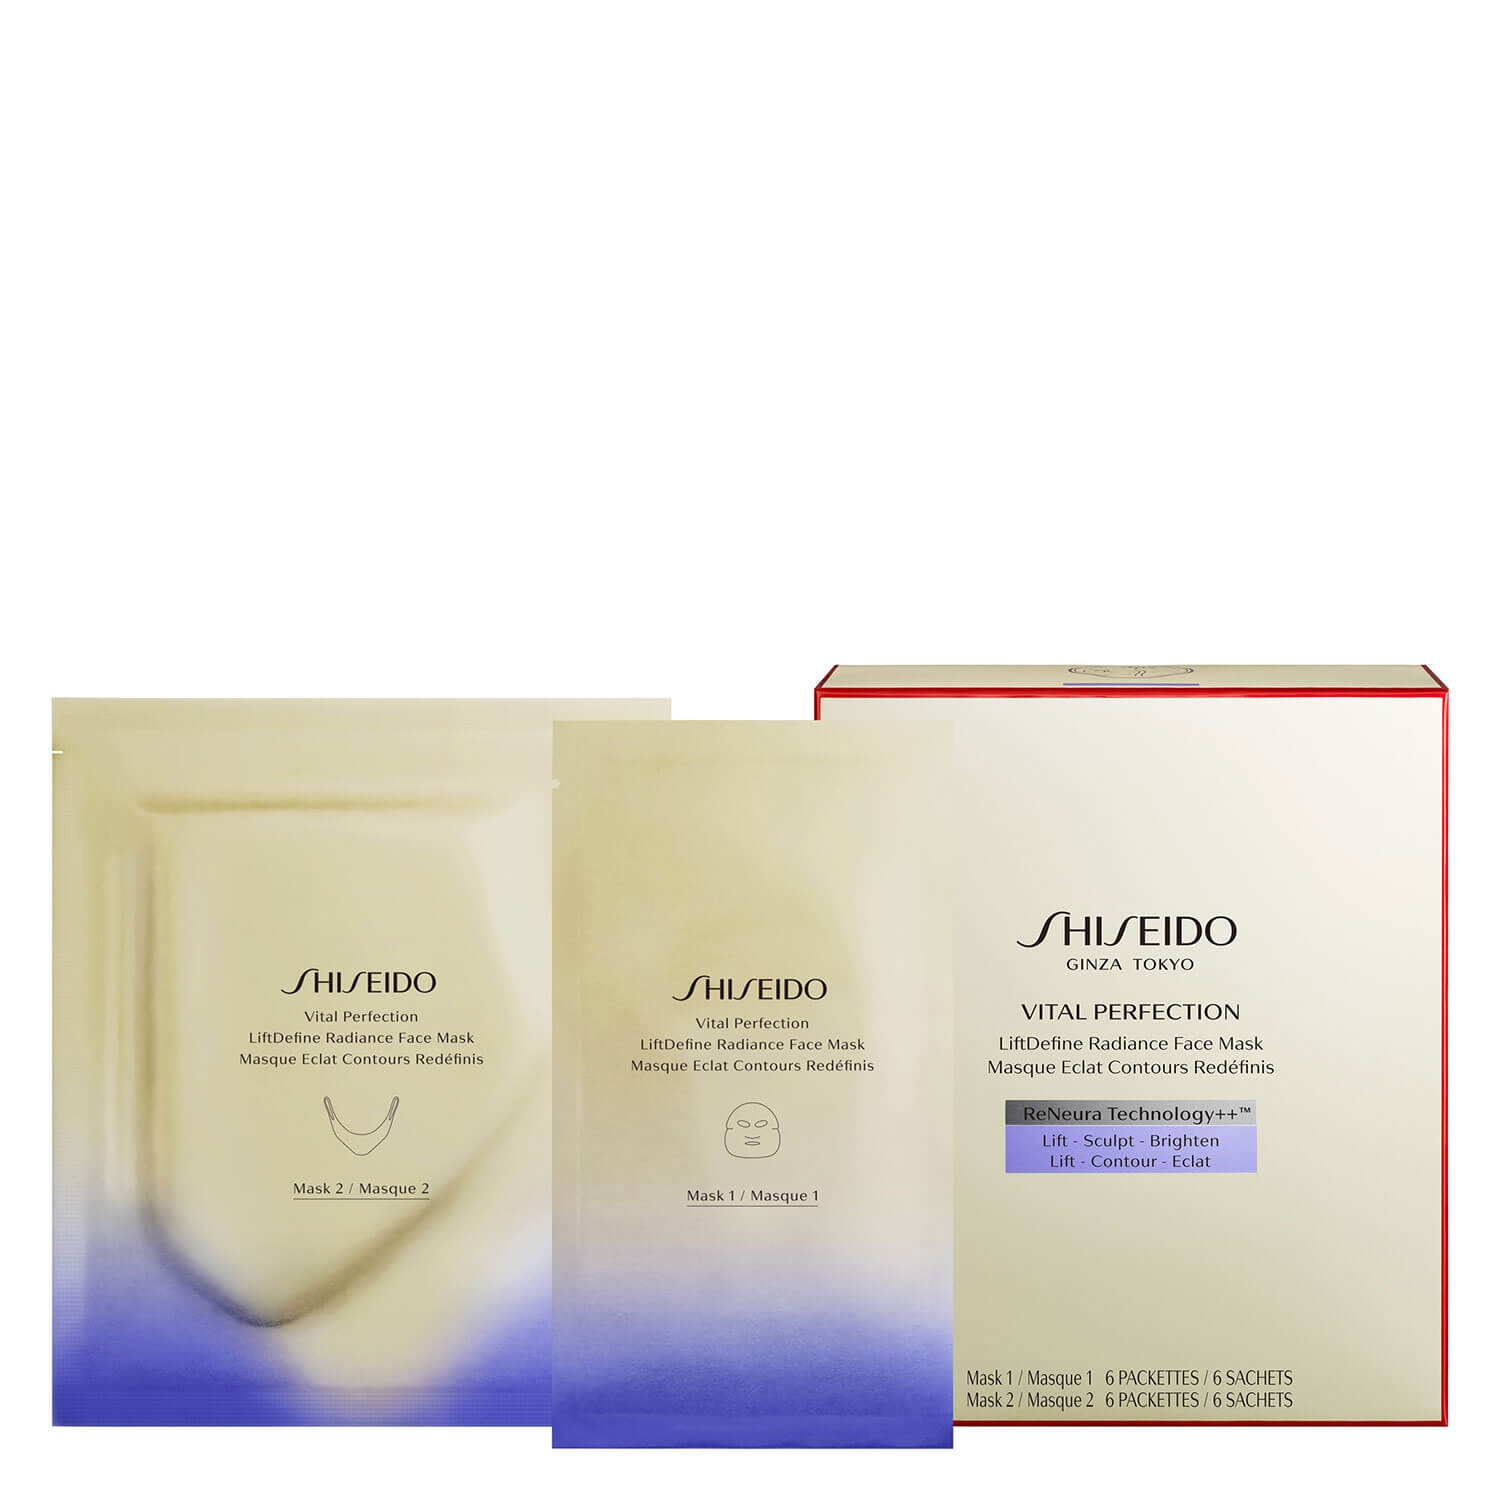 Product image from Vital Perfection - LiftDefine Radiance Face Mask